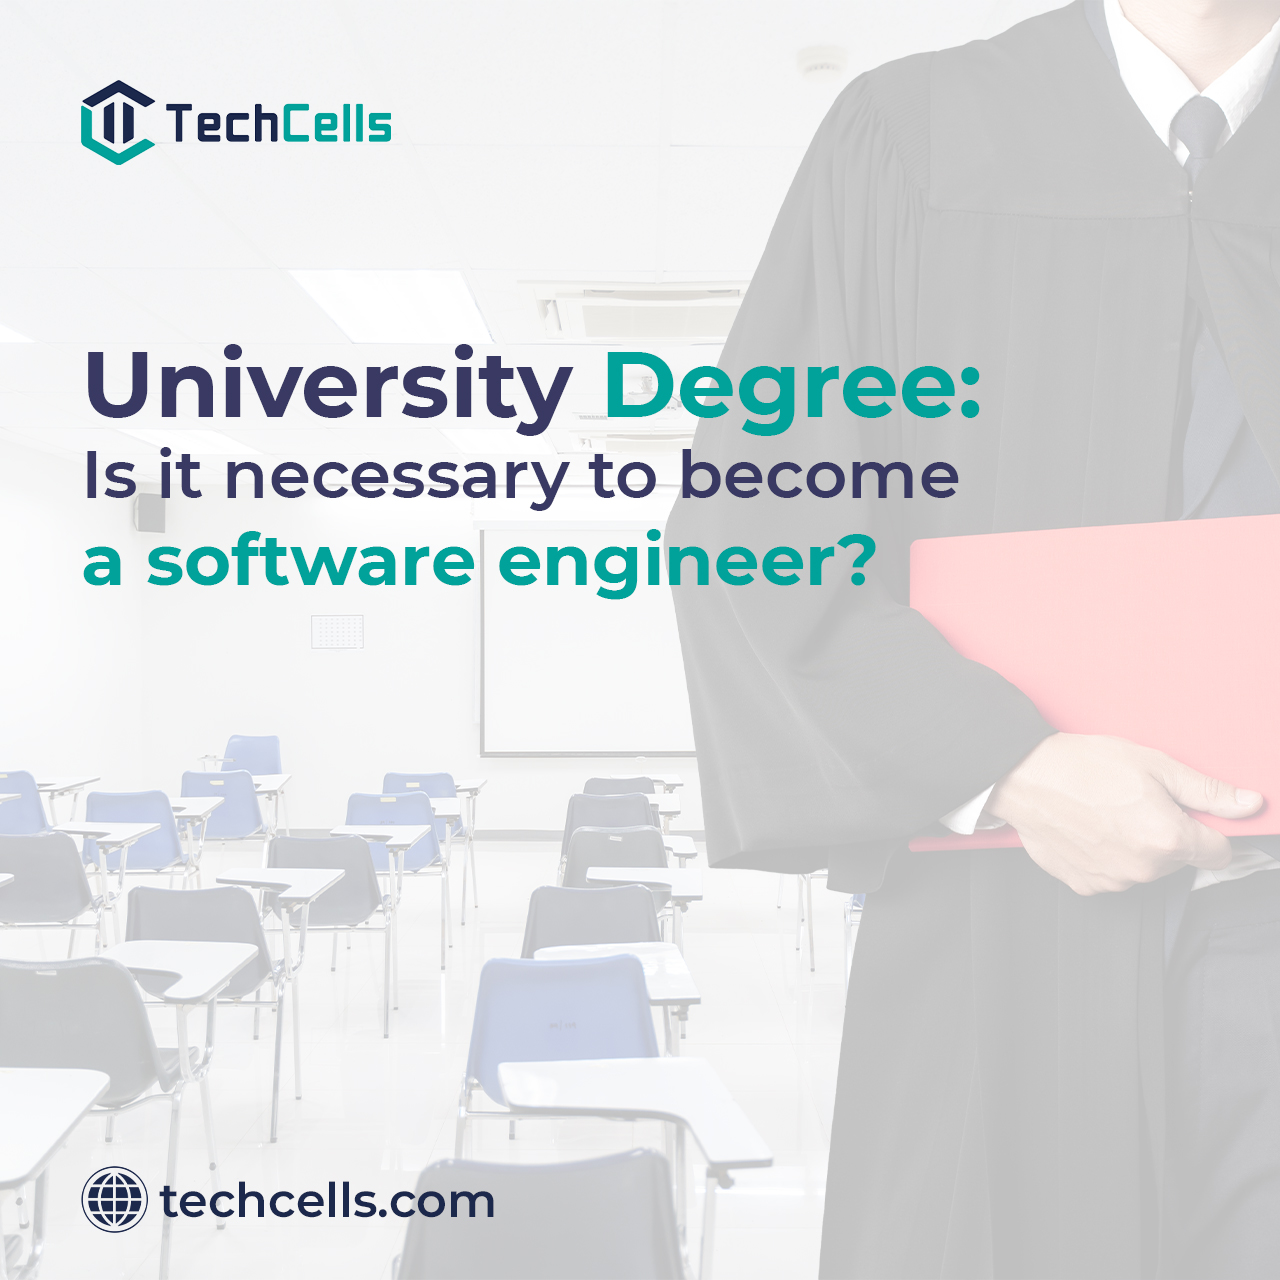 Is University Degree Needed to Become a Software Engineer?